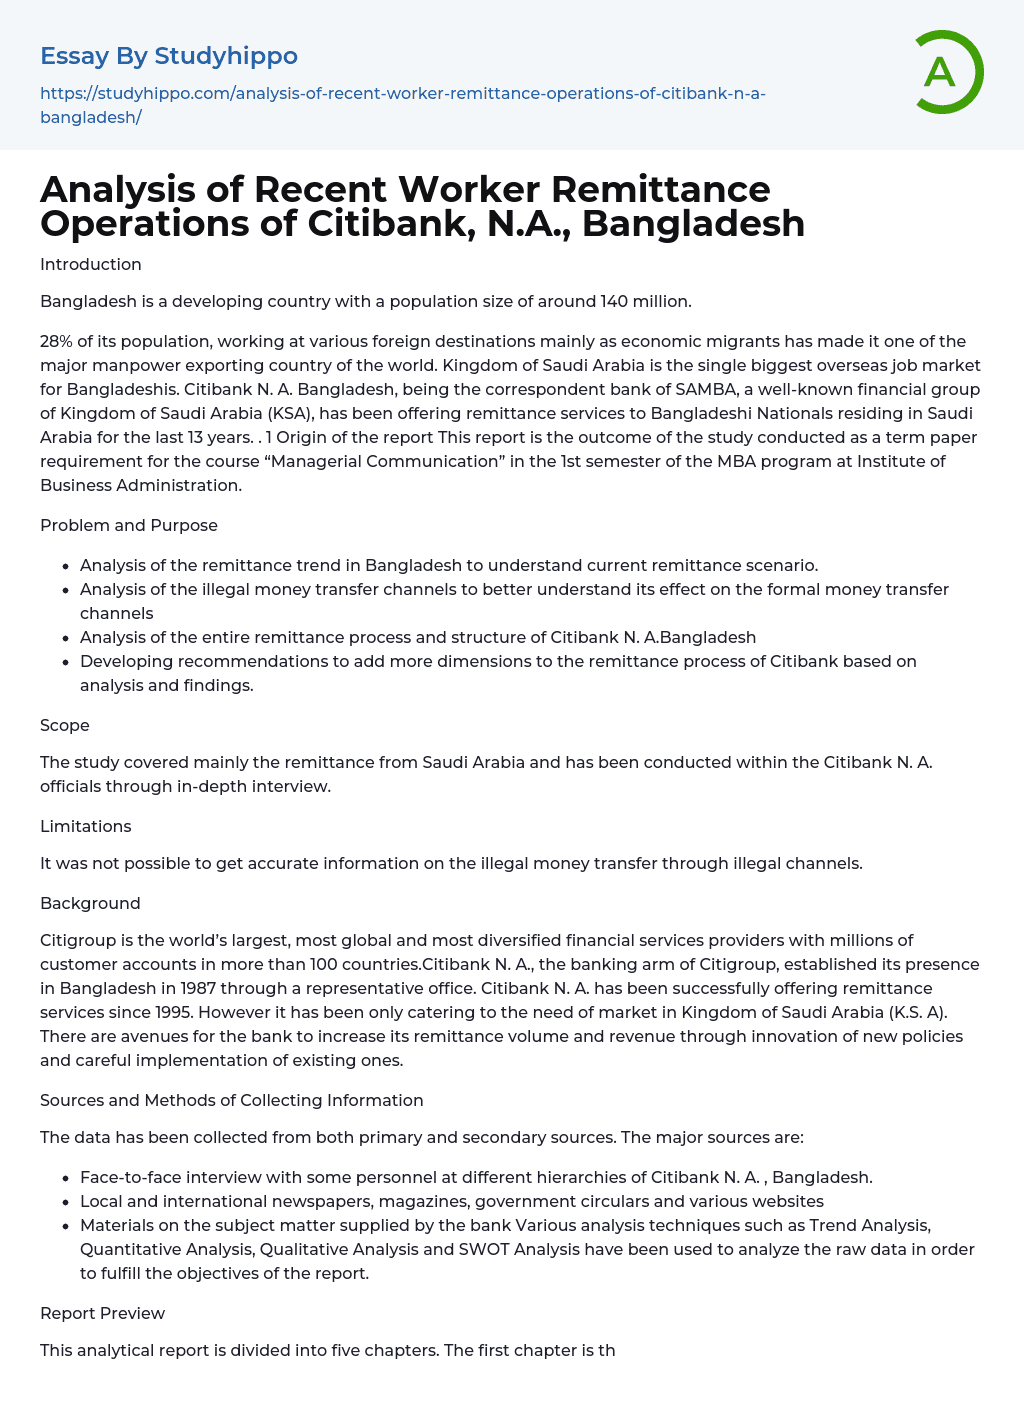 Analysis of Recent Worker Remittance Operations of Citibank, N.A., Bangladesh Essay Example